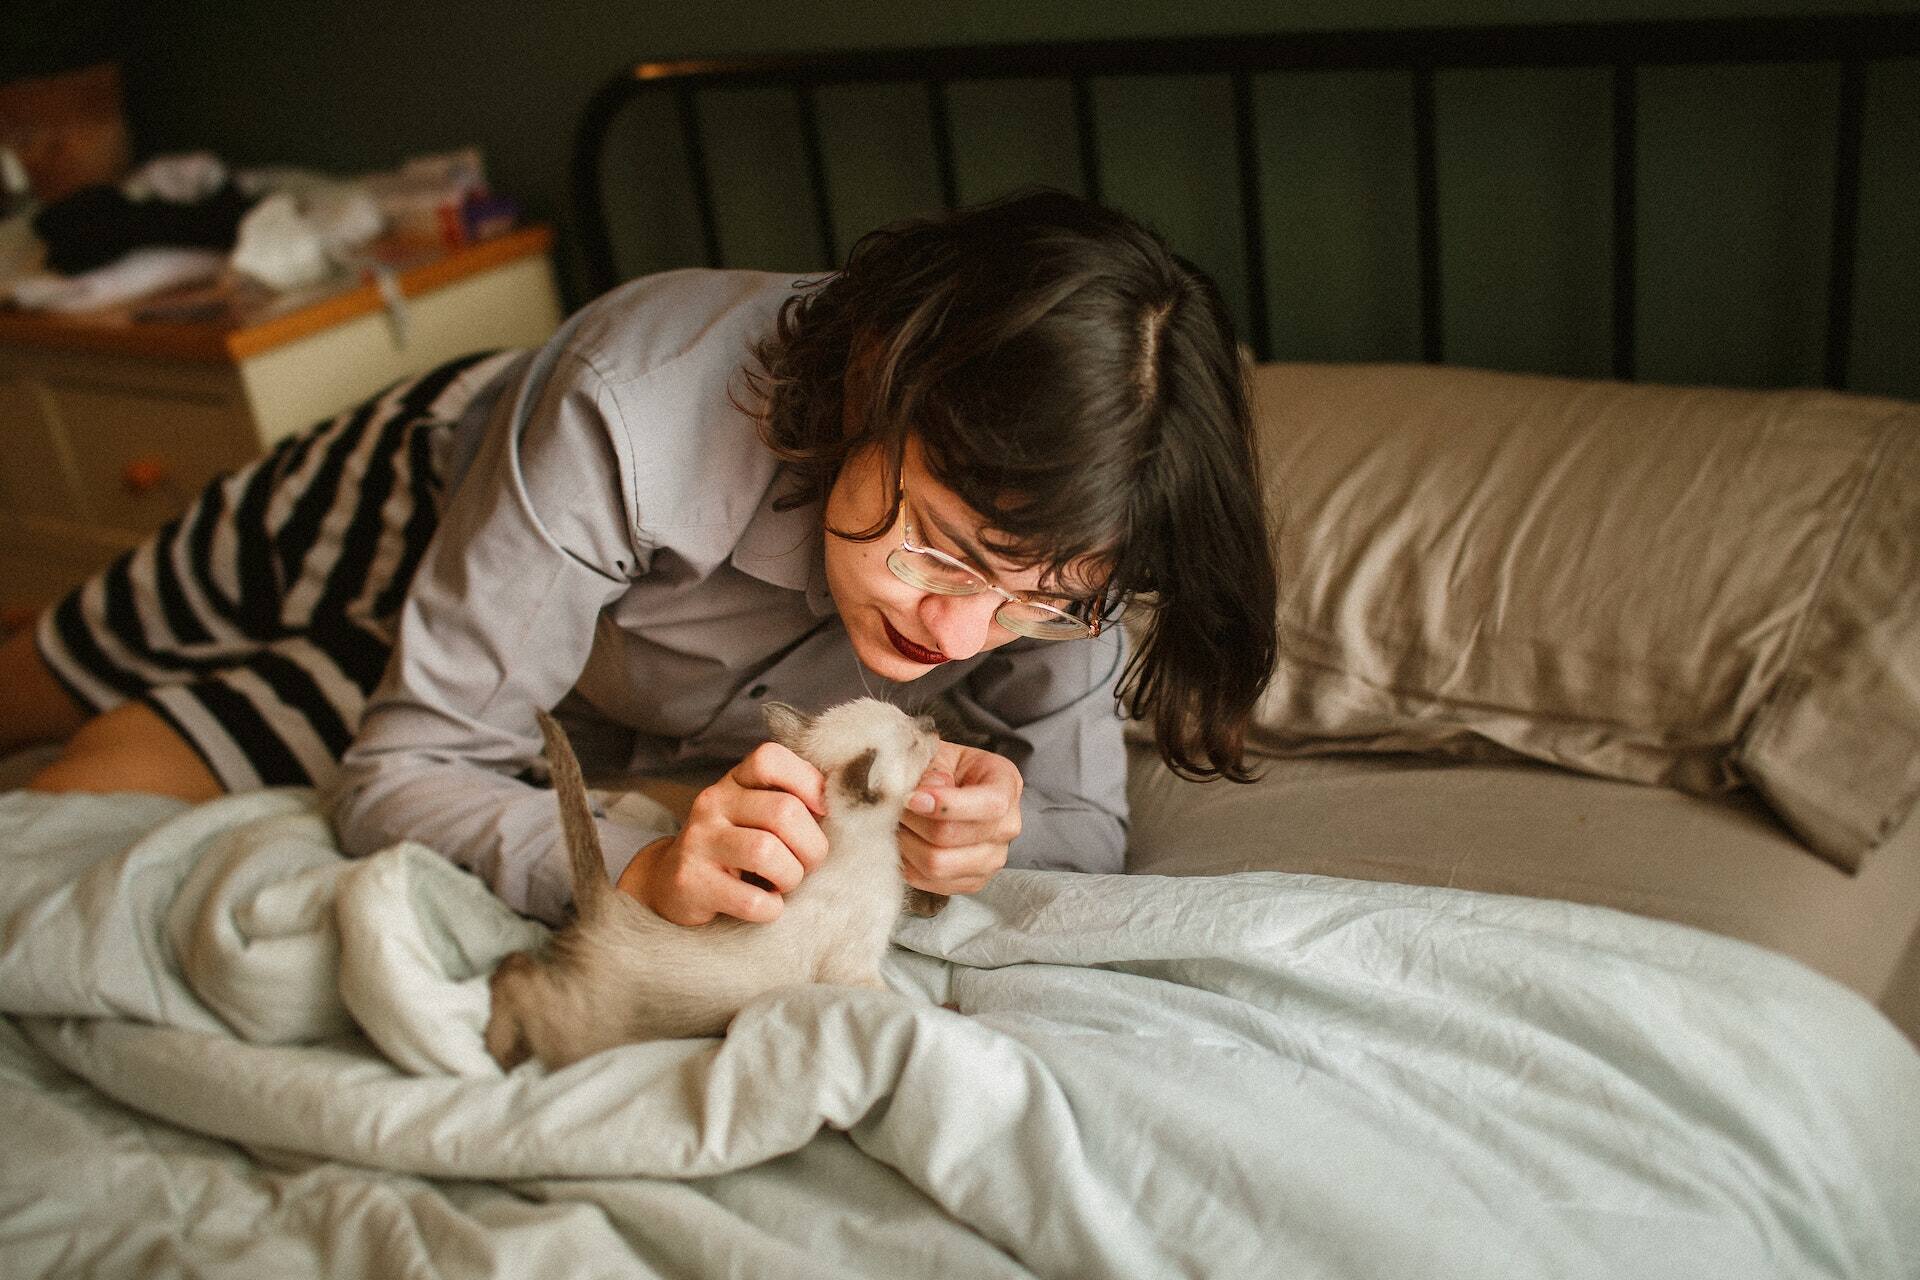 A woman cuddling a cat in bed